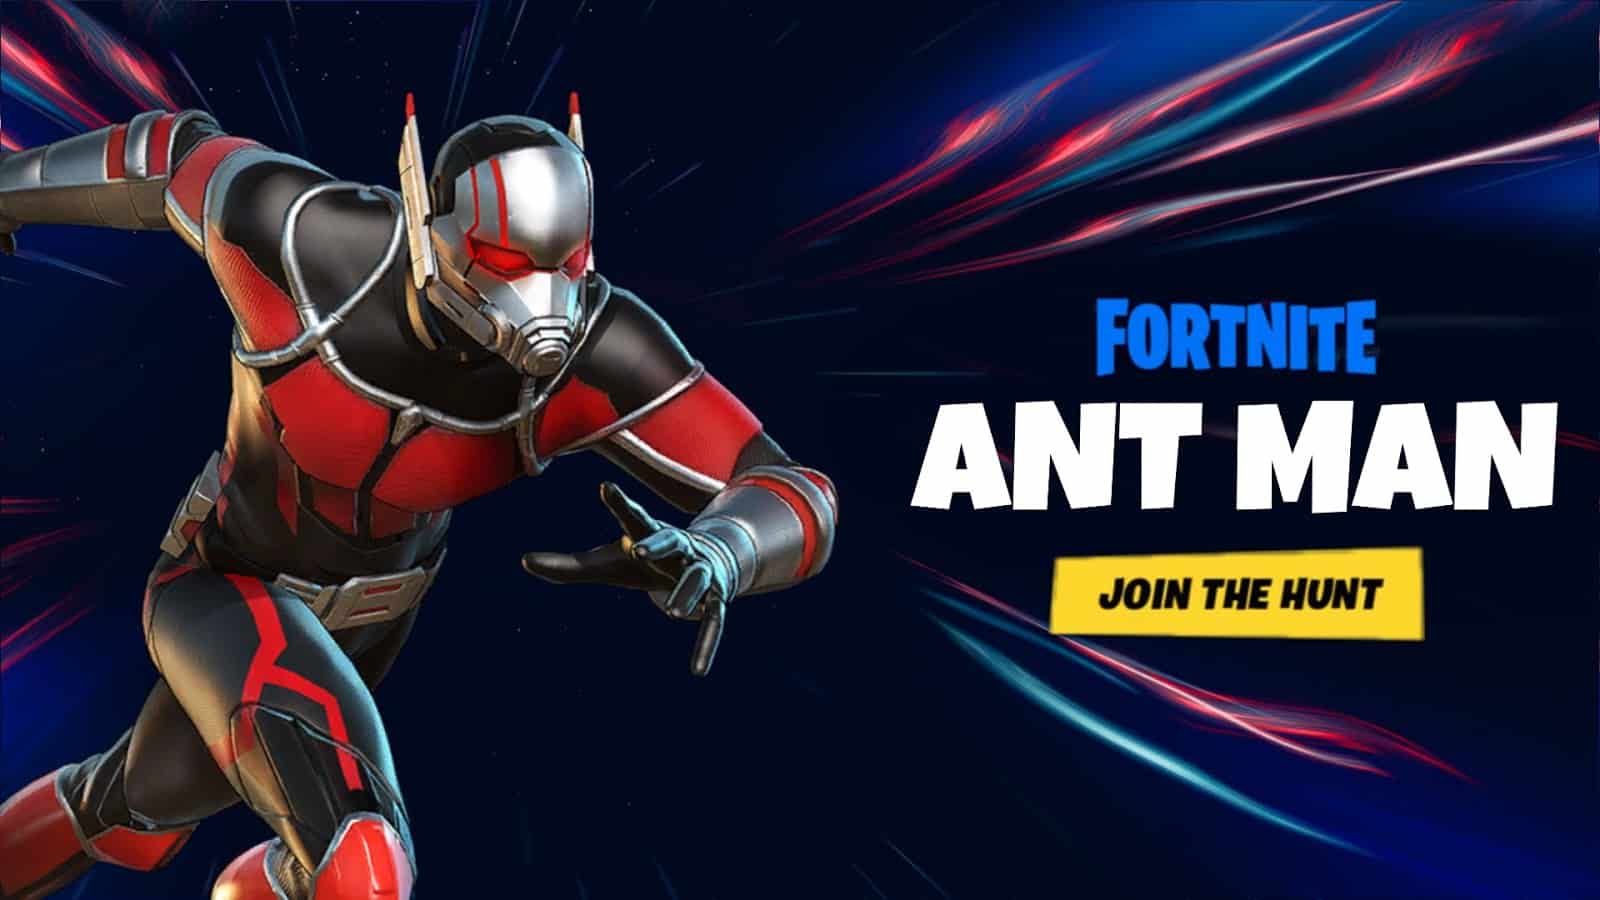 Fortnite: Leaks Confirm Ant-Man As Next Cross-Over